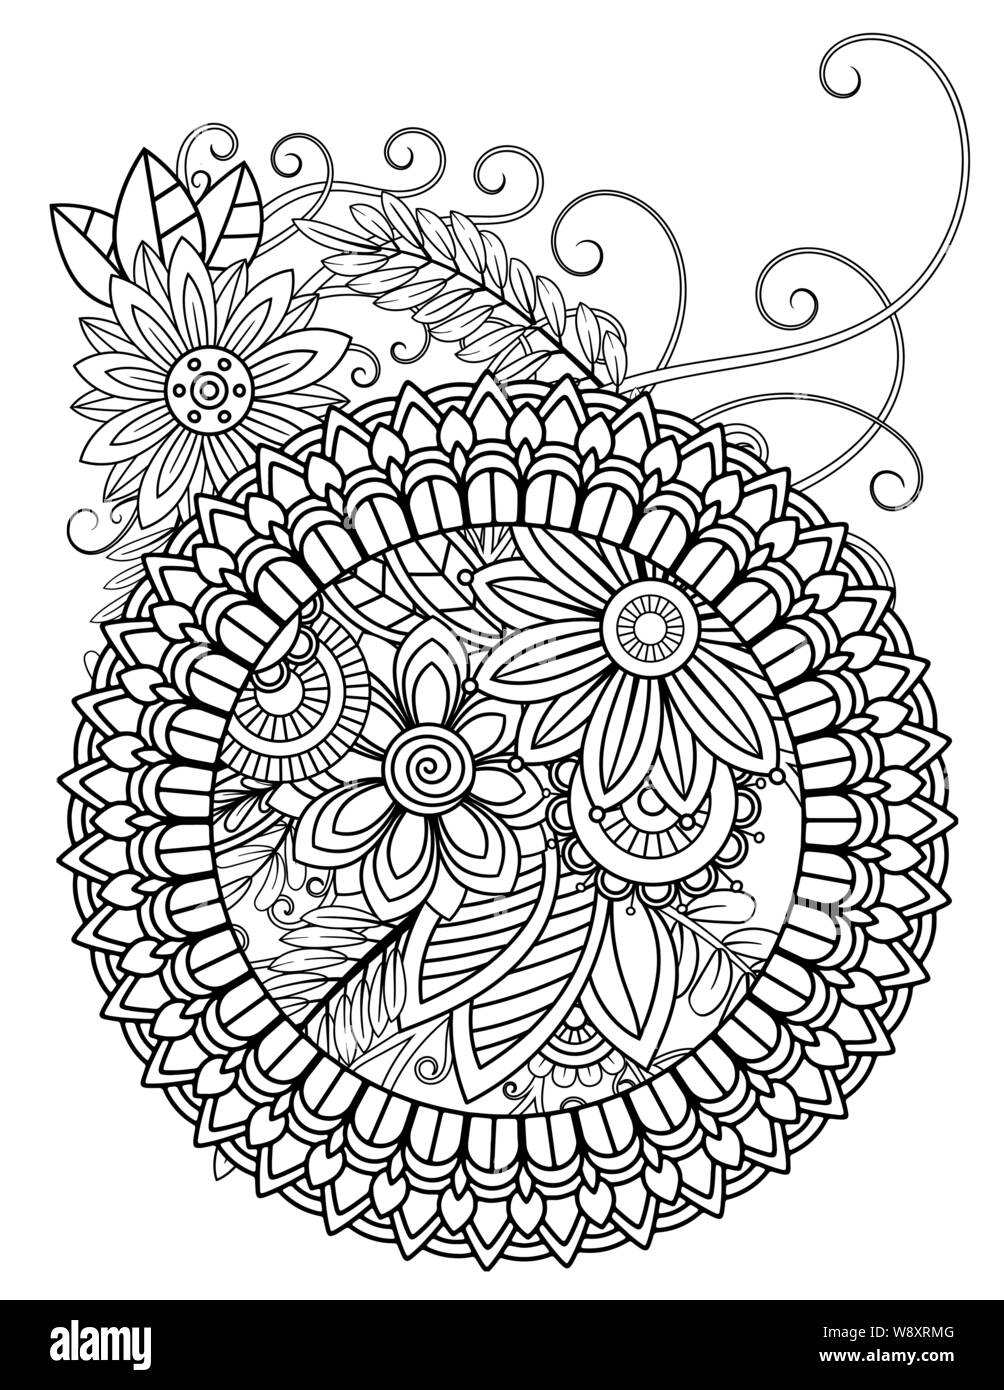 Floral mandala pattern in black and white. Adult coloring book ...